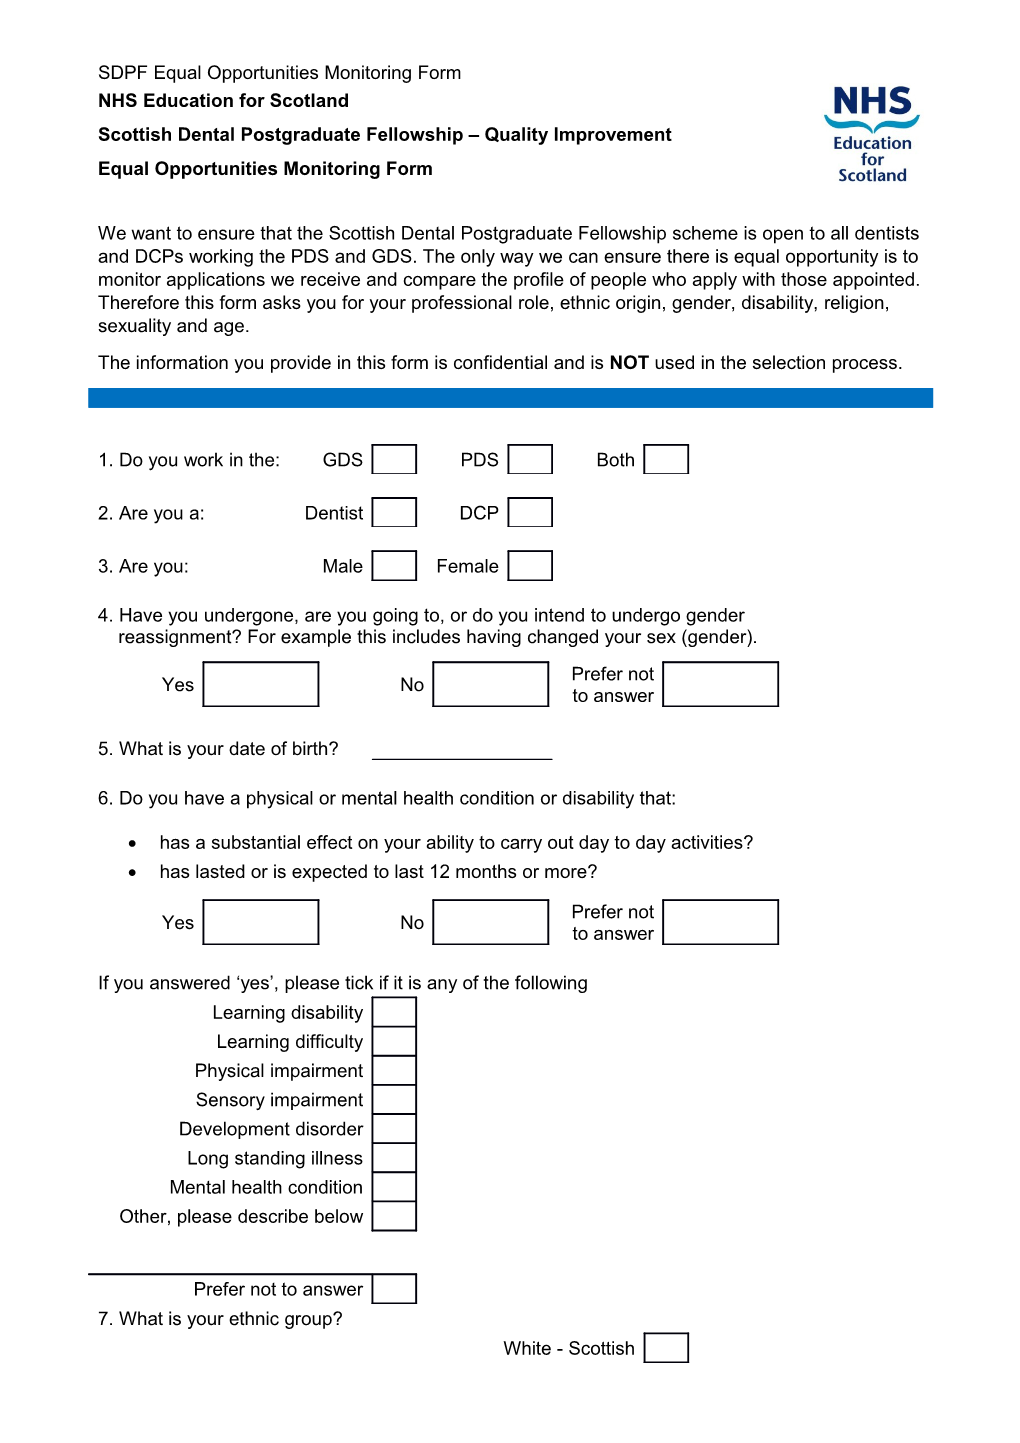 SDPF Equal Opportunities Monitoring Form